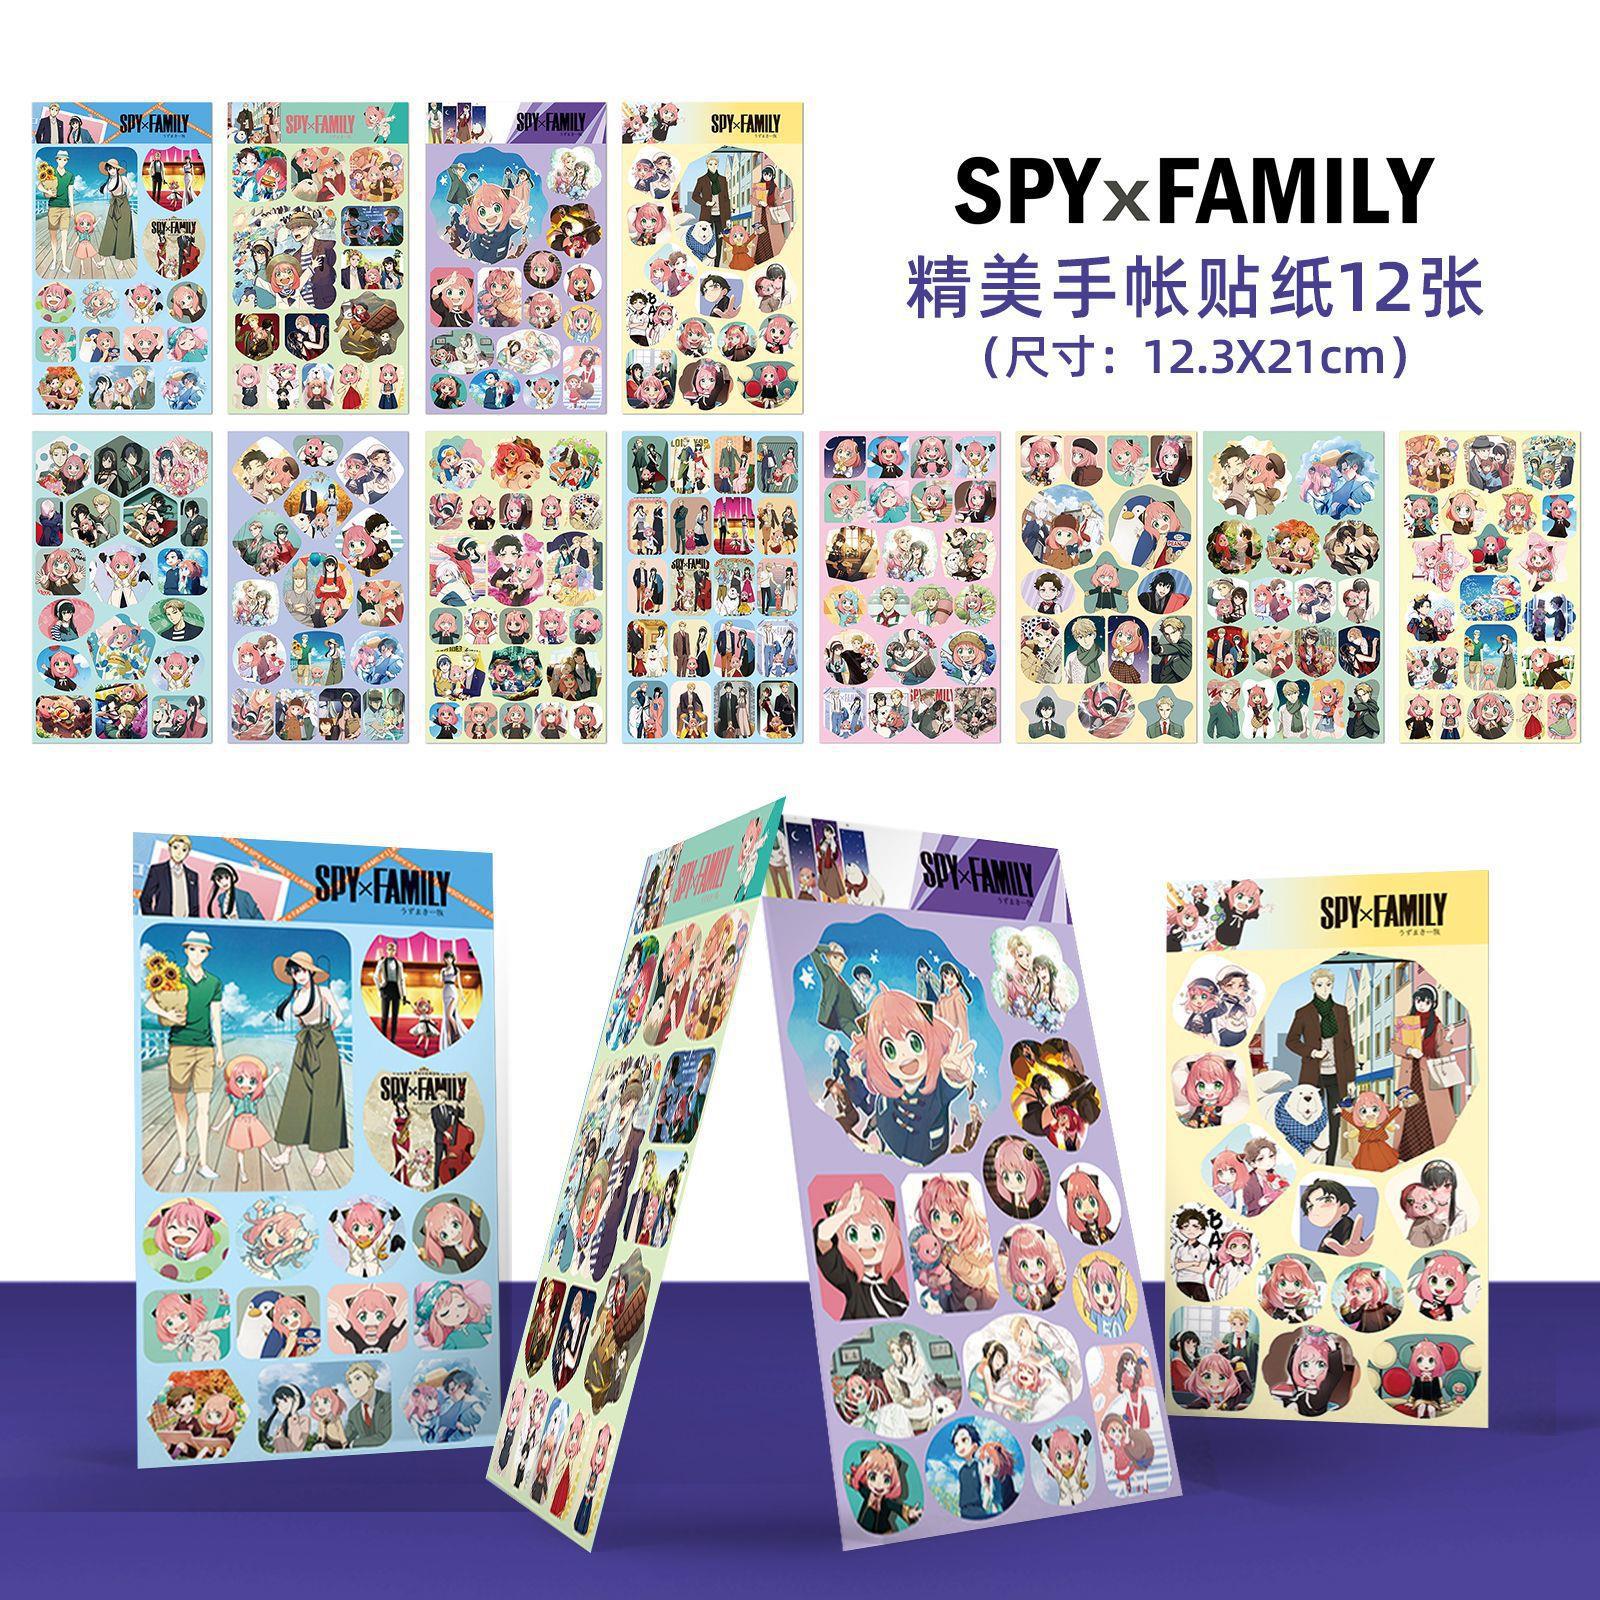 SPY×FAMILY anime beautifully stickers pack of 12, 21*12.3cm